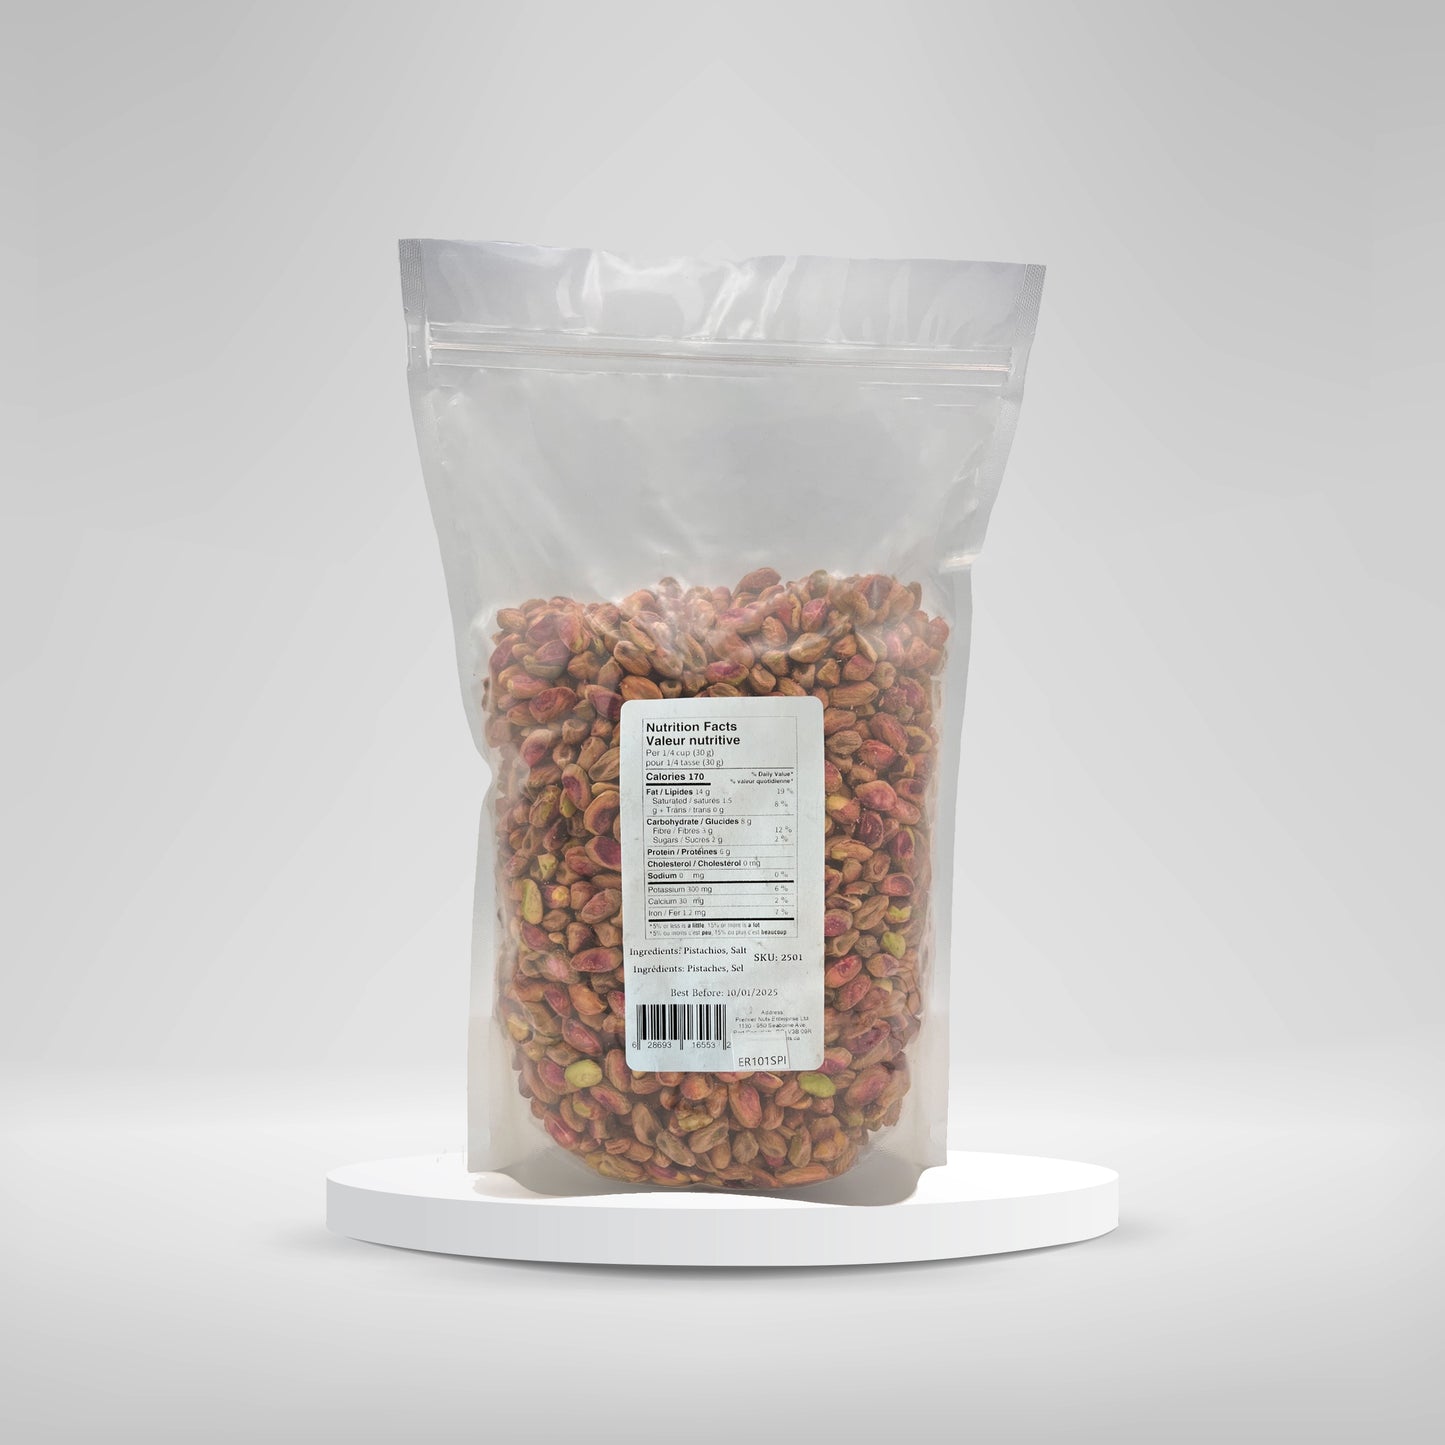 Salted Shelled Pistachios / 3LB